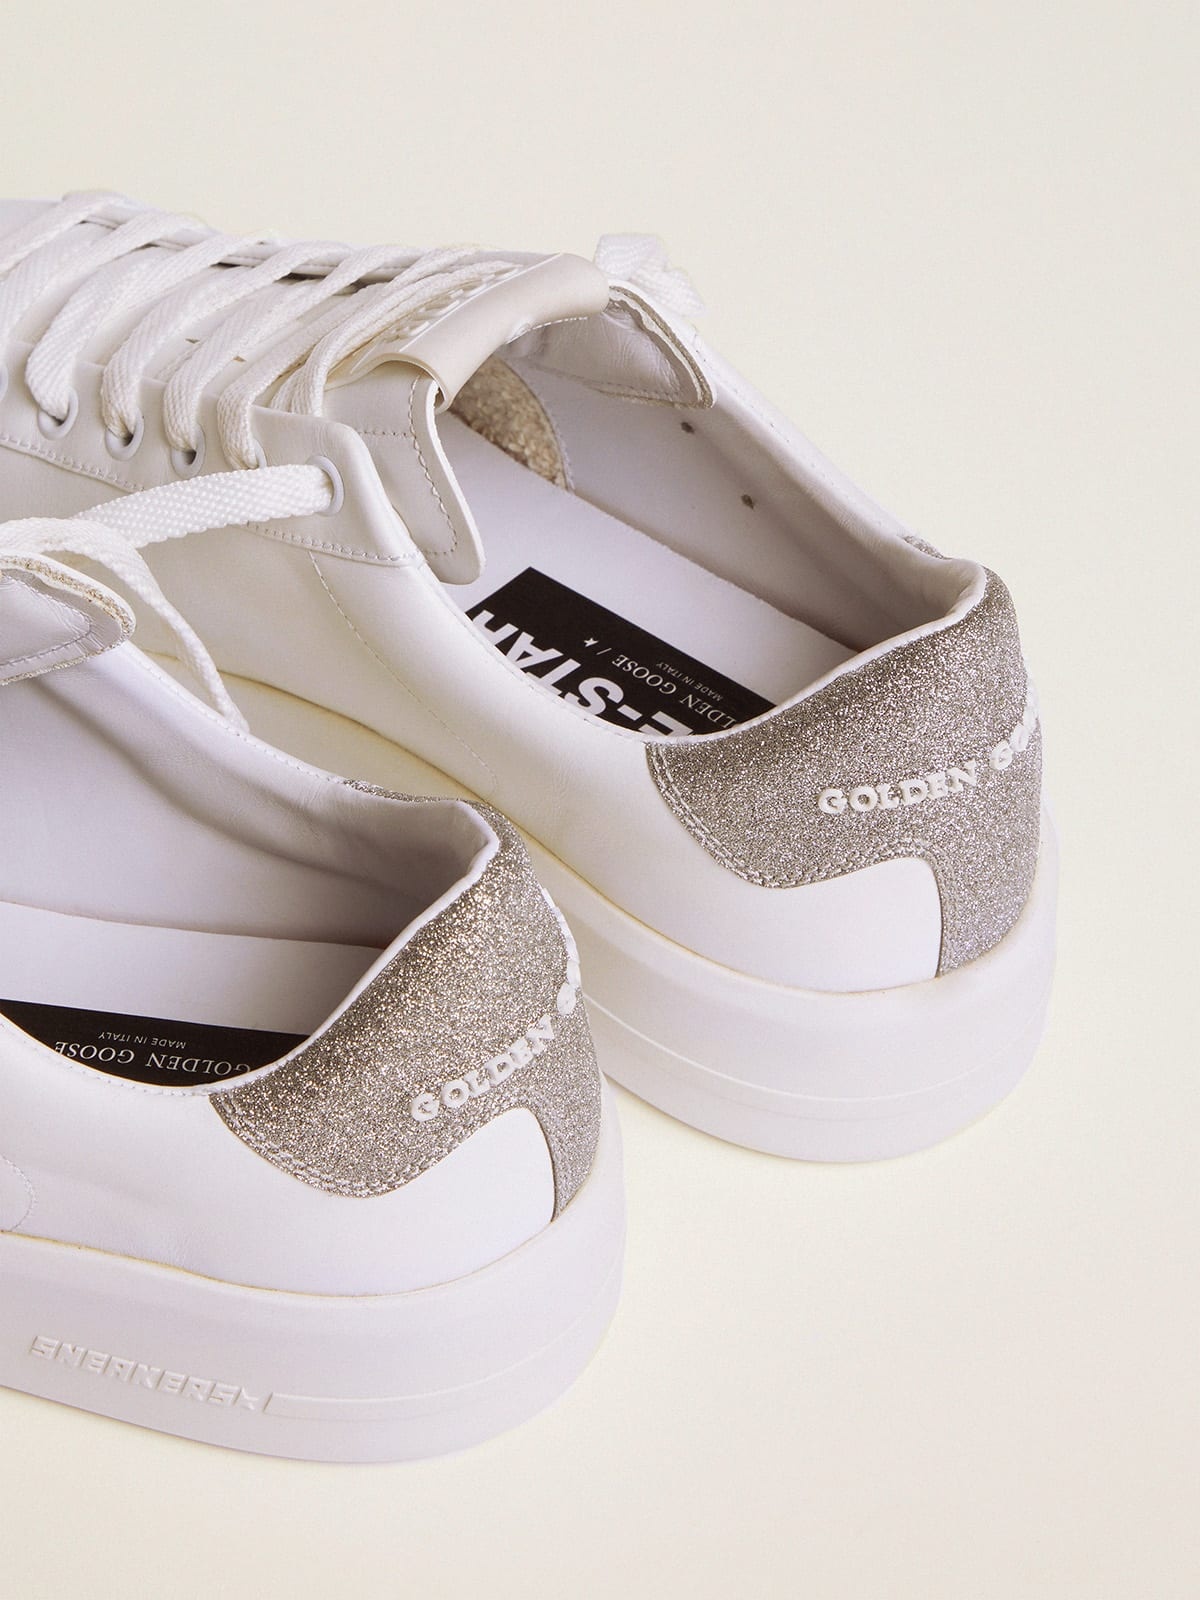 Purestar sneakers in white leather with tone-on-tone star and silver micro-glitter heel tab - 4